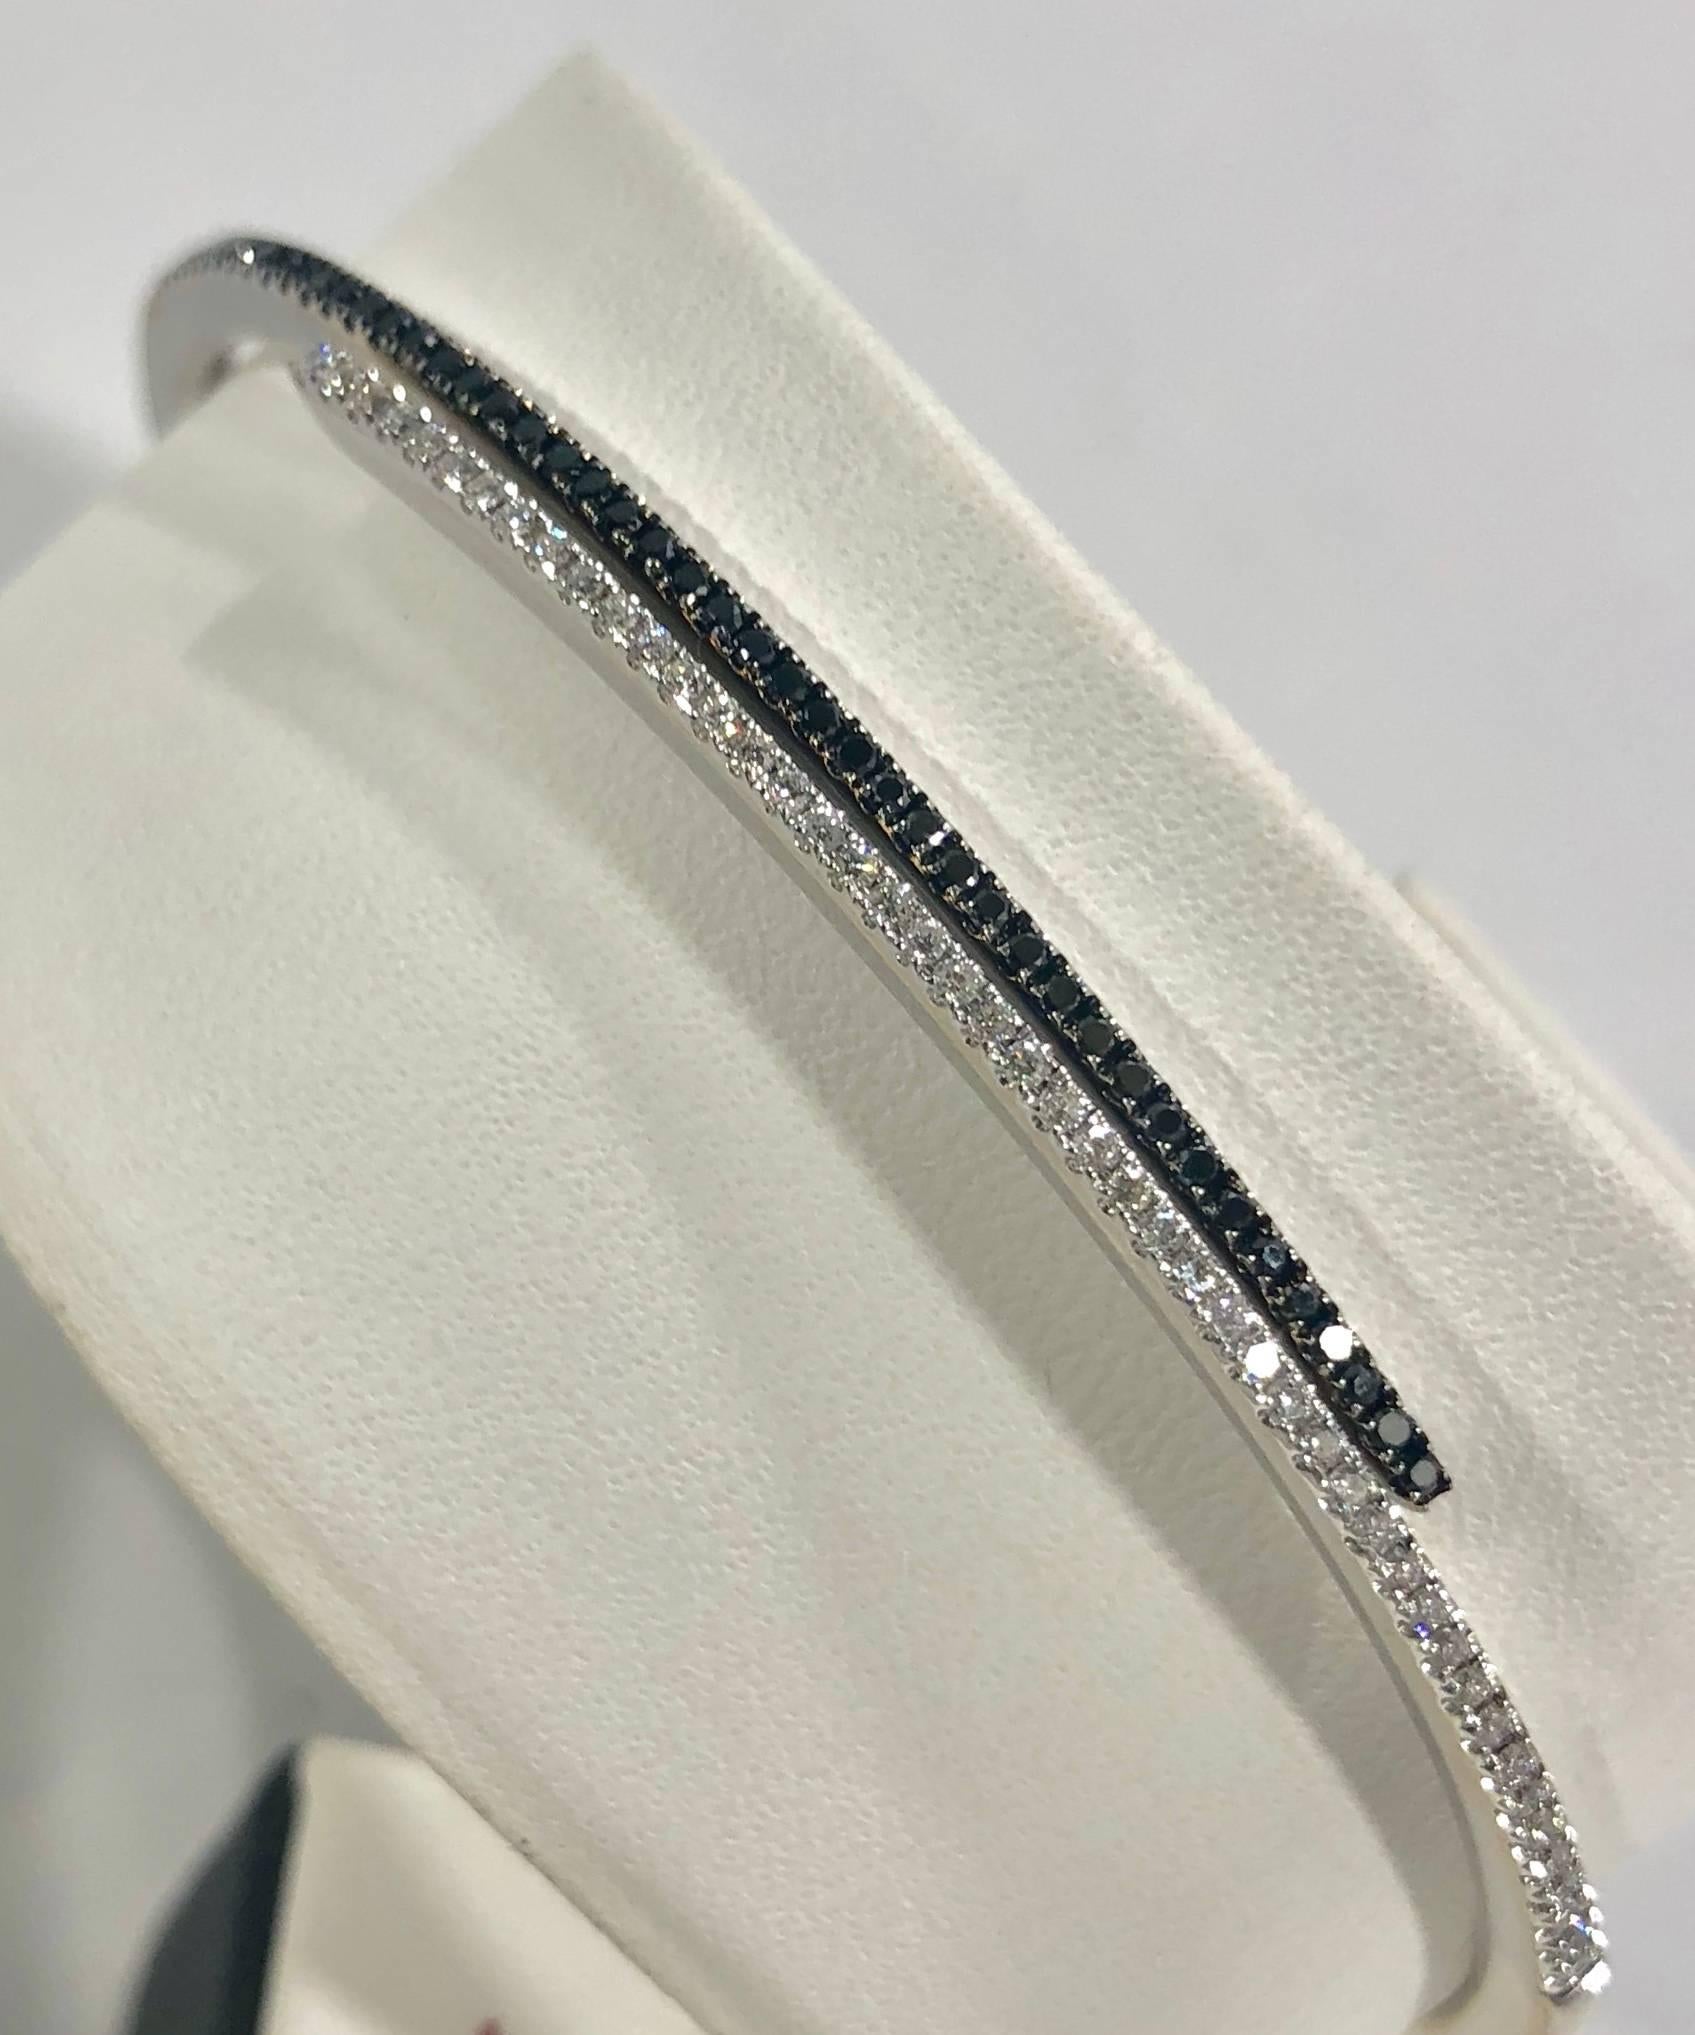 Cherie Dori 18 karat white gold and diamond cuff bracelet. This unique piece is created in 18 karat white gold, weight equaling 15.8 grams/ 10.1 dwt. There are 47 full cut round black diamonds equaling .25 carat total weight, and 47 full cut round